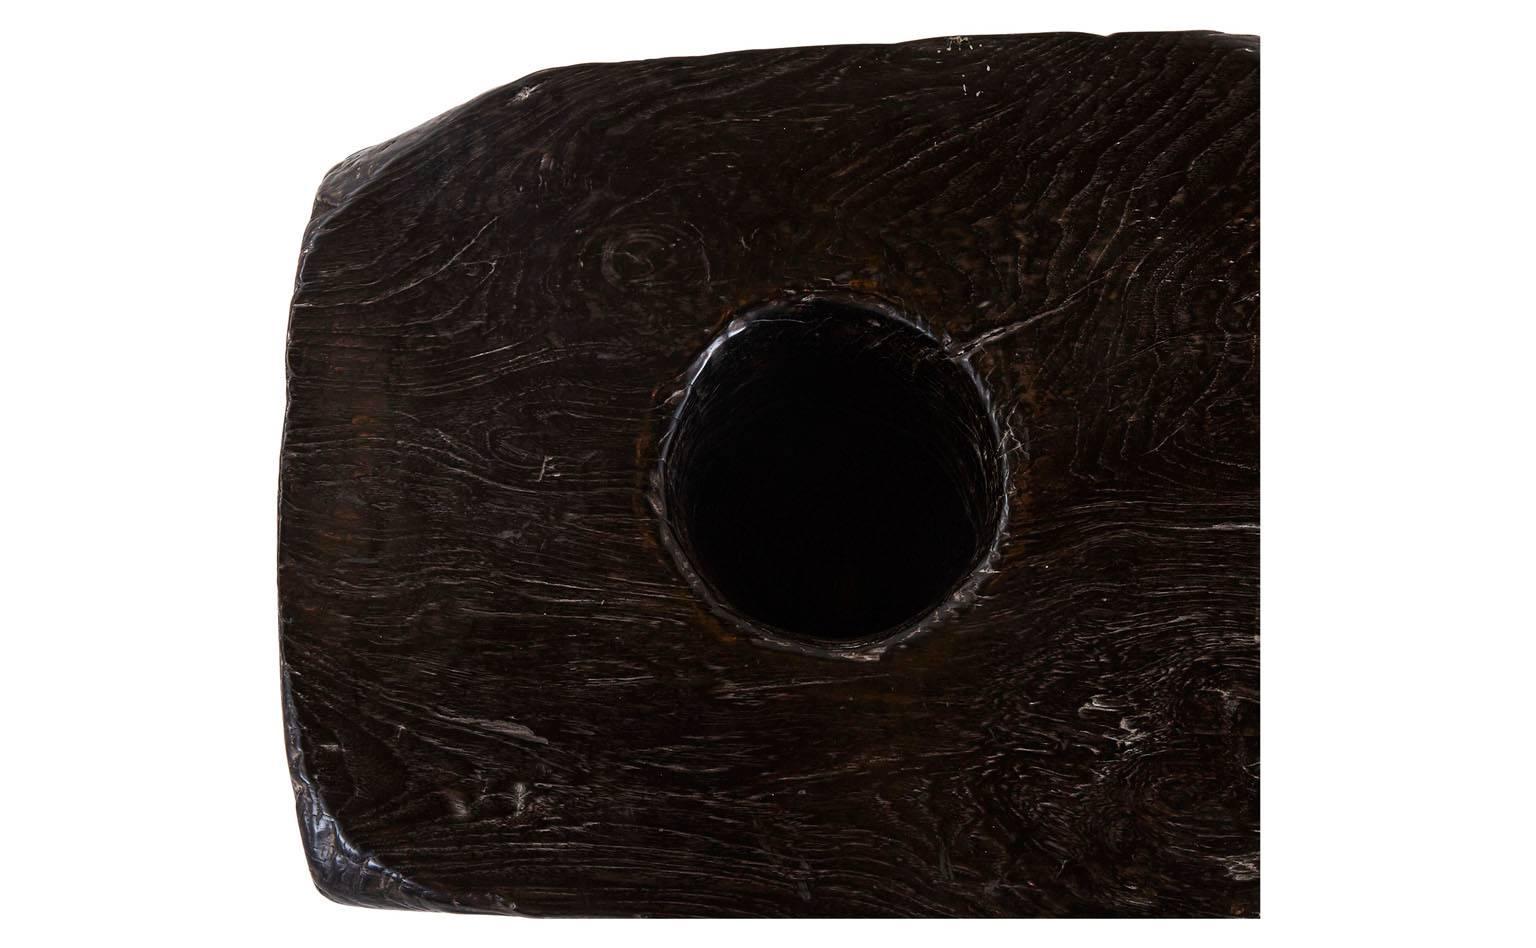 Originally used to grind rice
Blackened teak wood
Indonesia
Dimensions: 18'D x 27'W x 12'H

All of our black mortars are hand selected and each is unique. Once you've placed your order, we will email you available mortars to choose from.